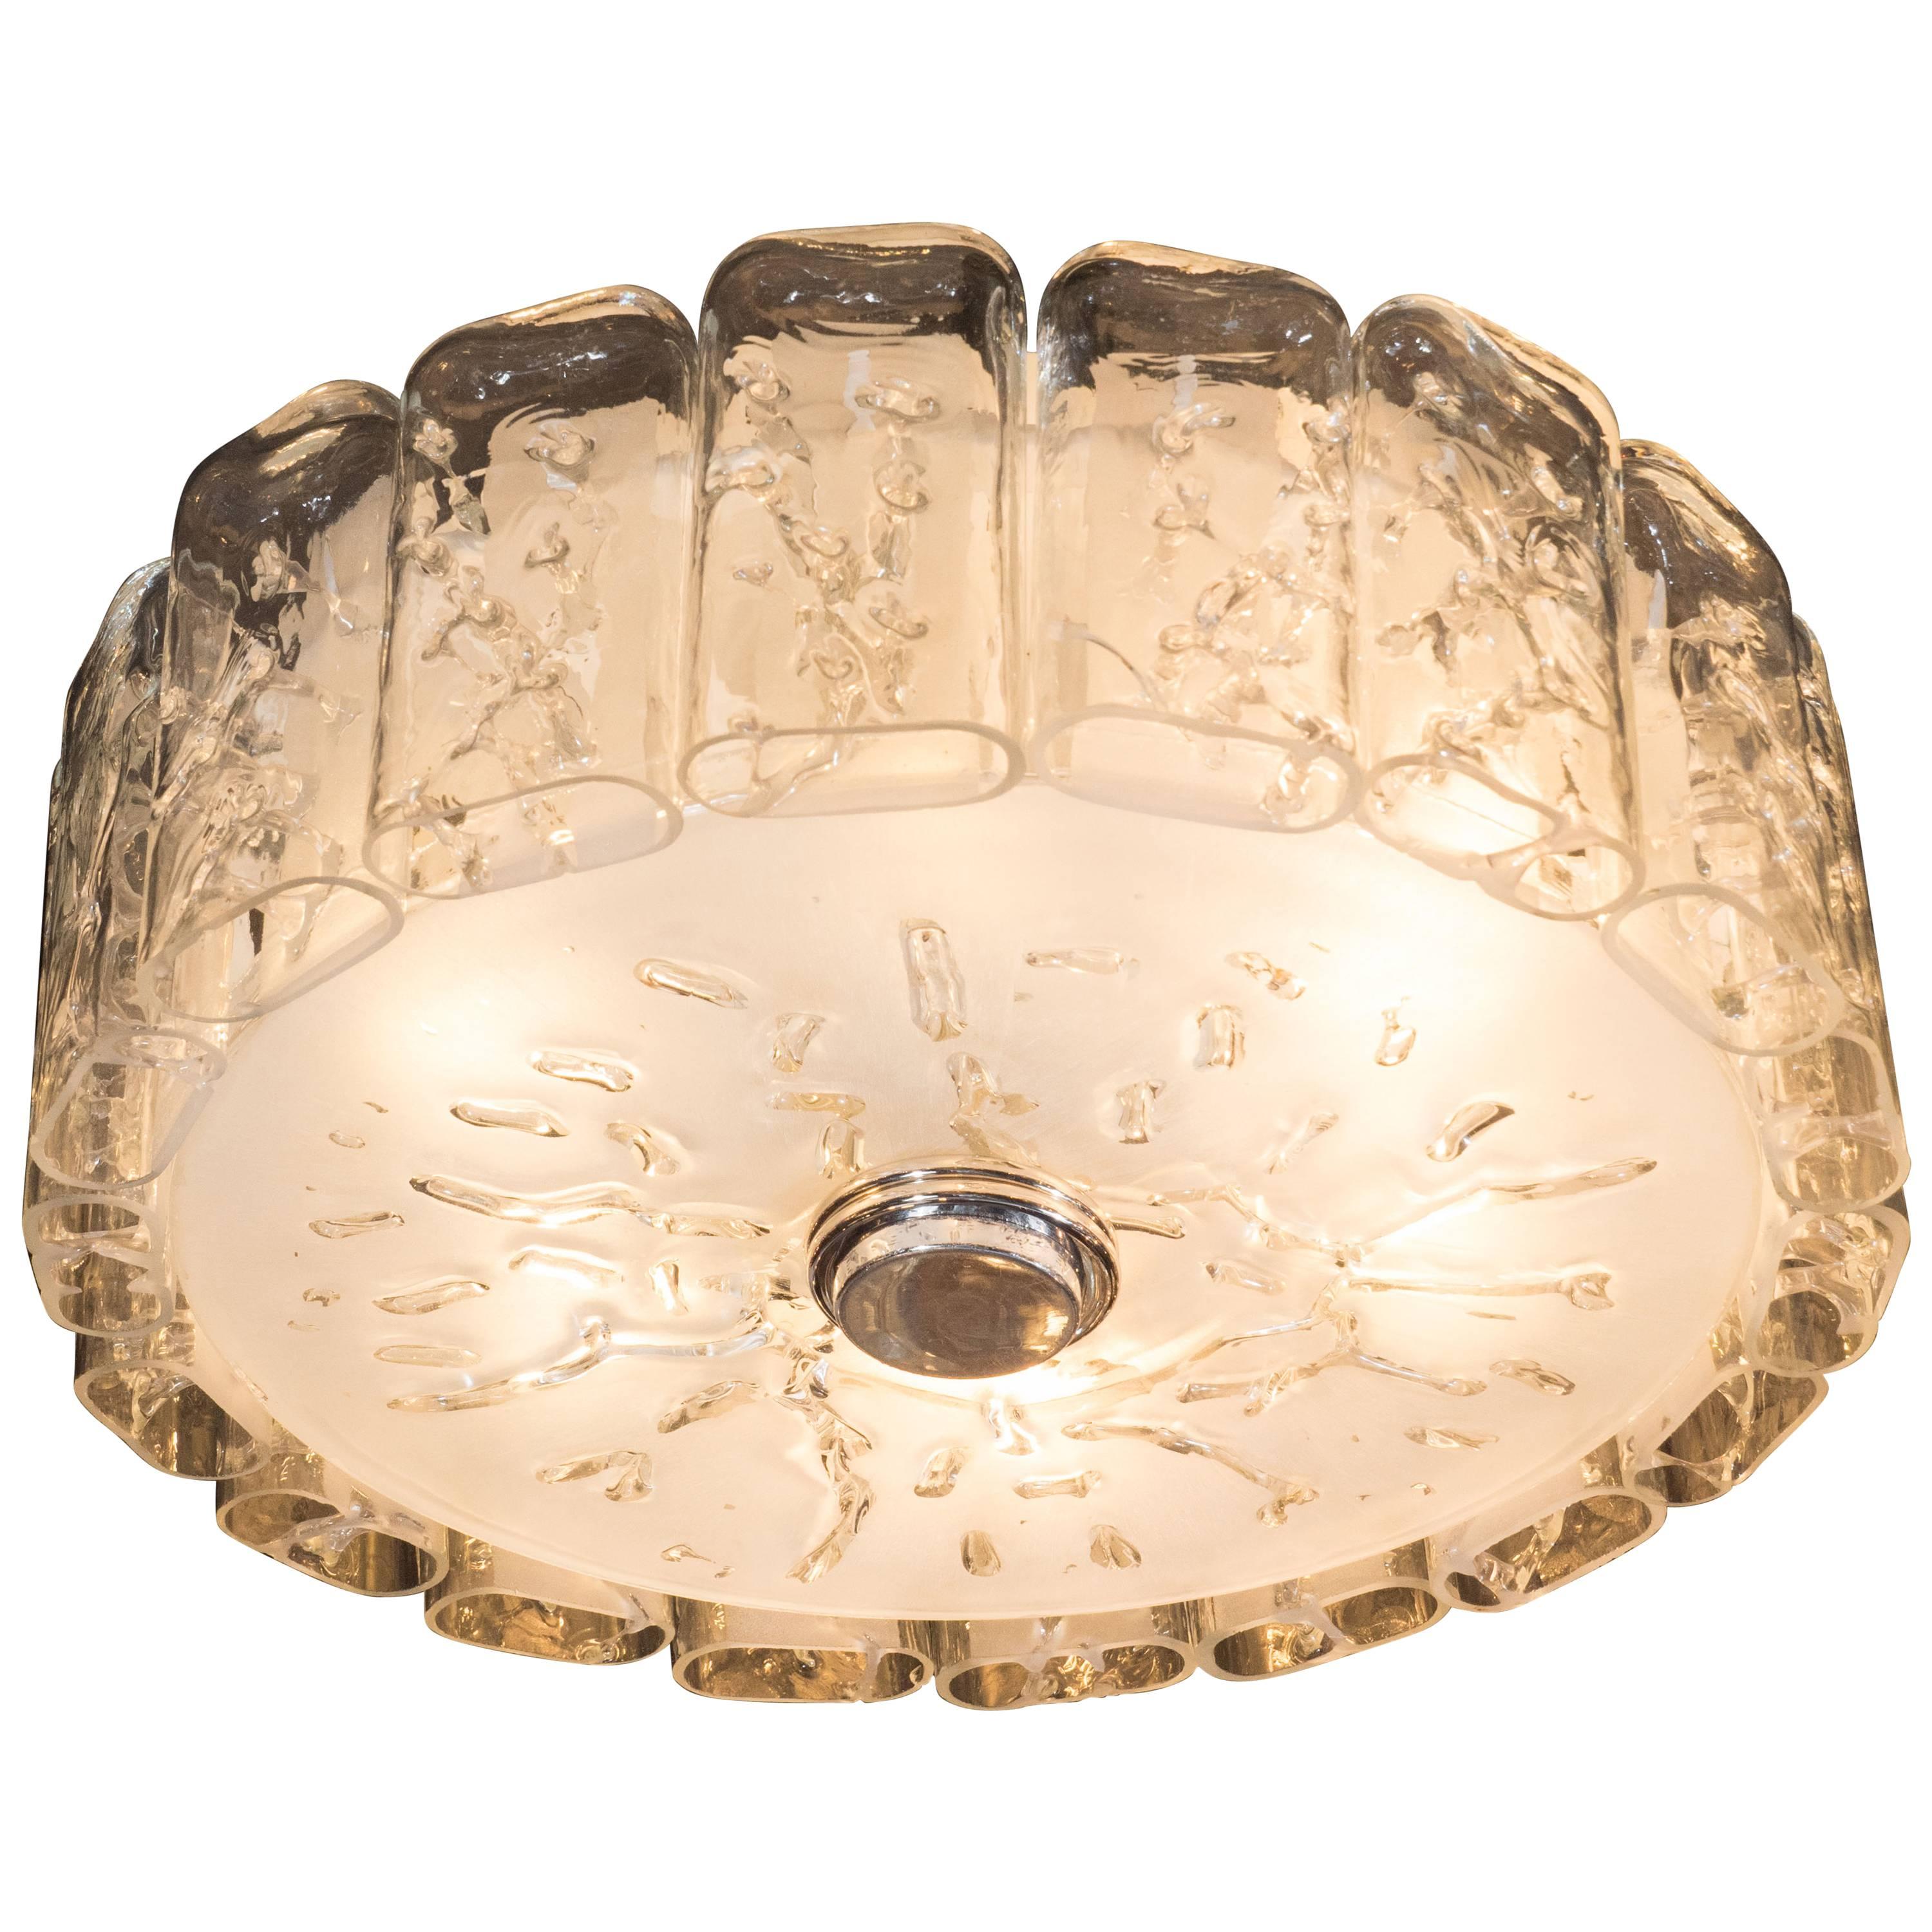 Mid-Century Modern Flush Mount Chandelier in Frosted and Textured Glass by Doria